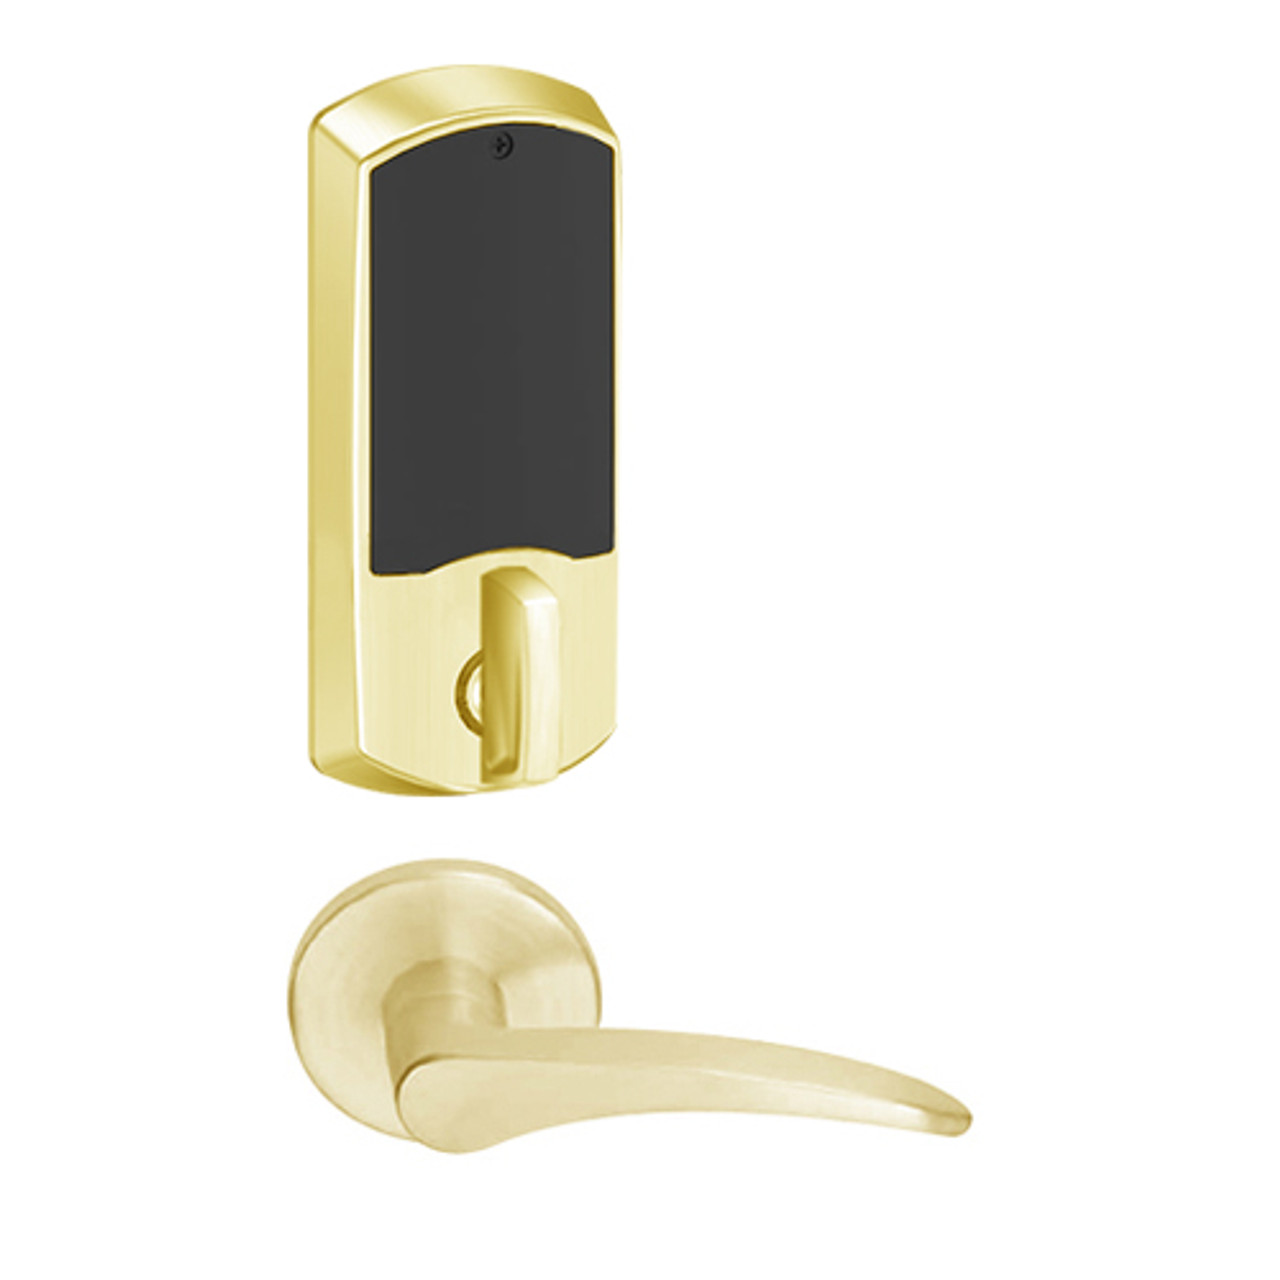 LEMD-GRW-J-12-605-00B-RH Schlage Privacy/Apartment Wireless Greenwich Mortise Deadbolt Lock with LED and 12 Lever Prepped for FSIC in Bright Brass